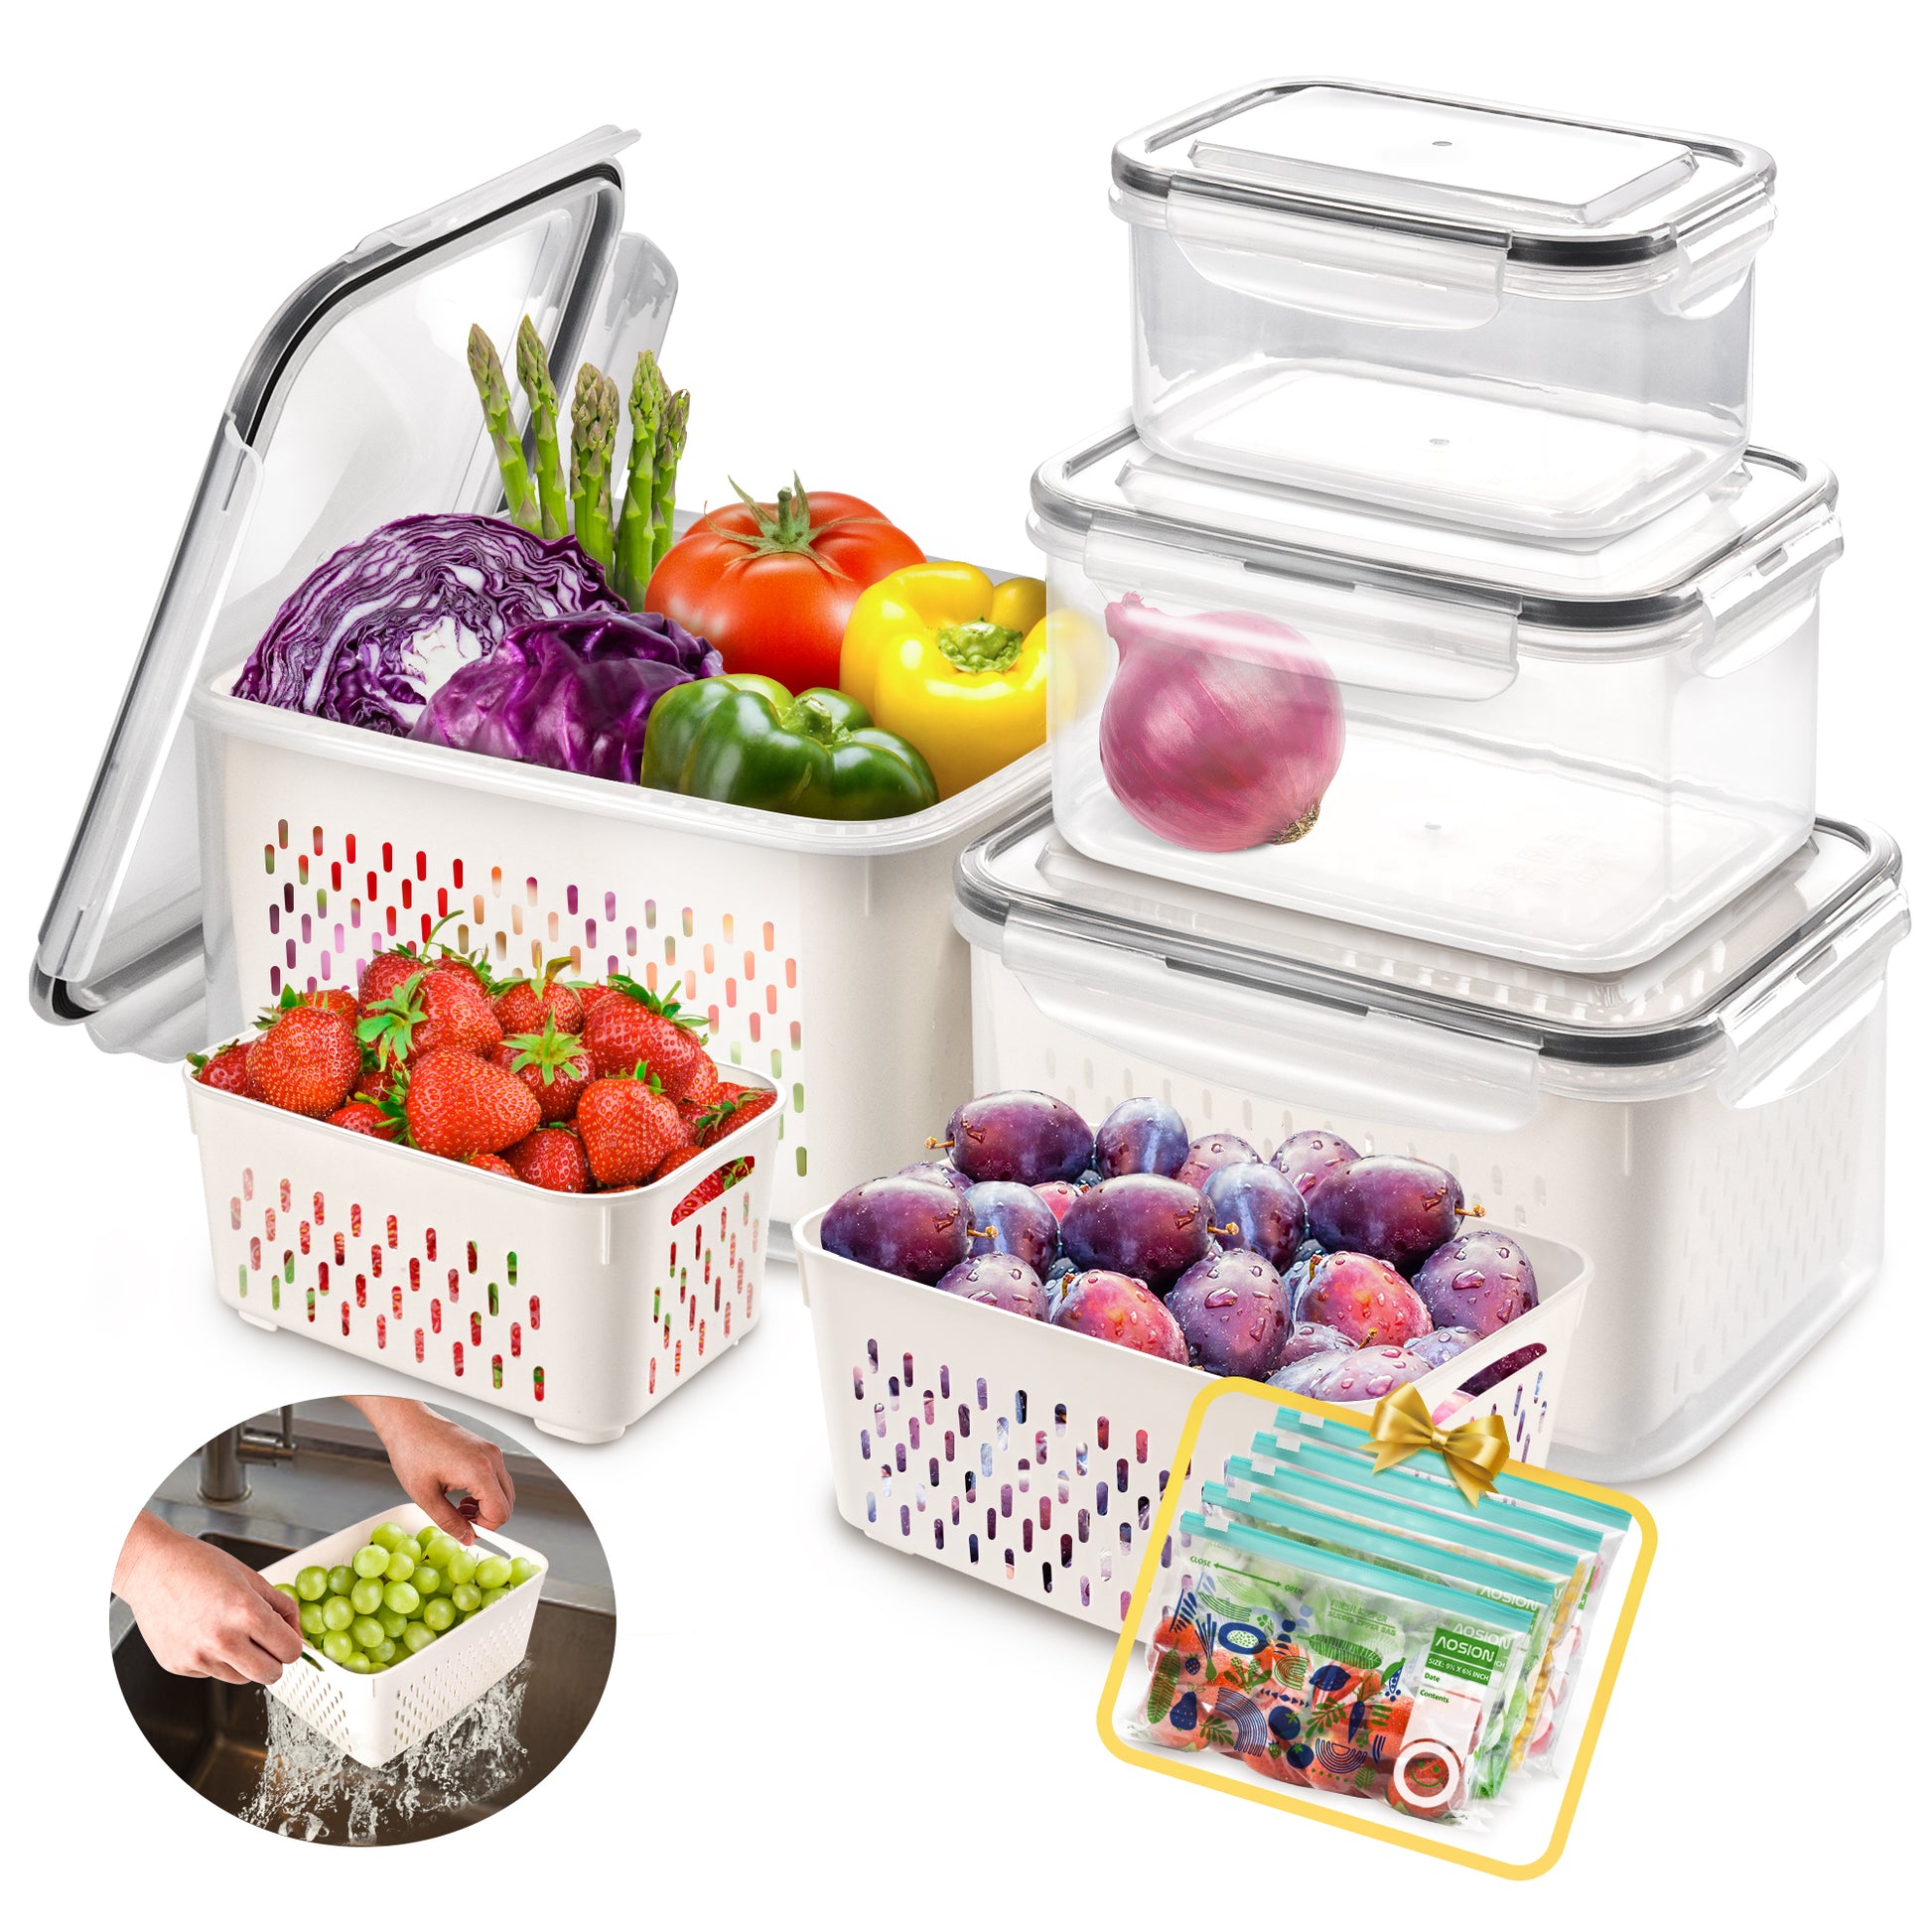 Fruit Containers for Fridge - Leakproof Food Storage Containers with  Removable Colander - Dishwasher & microwave safe Produce Containers Keep  Fruits